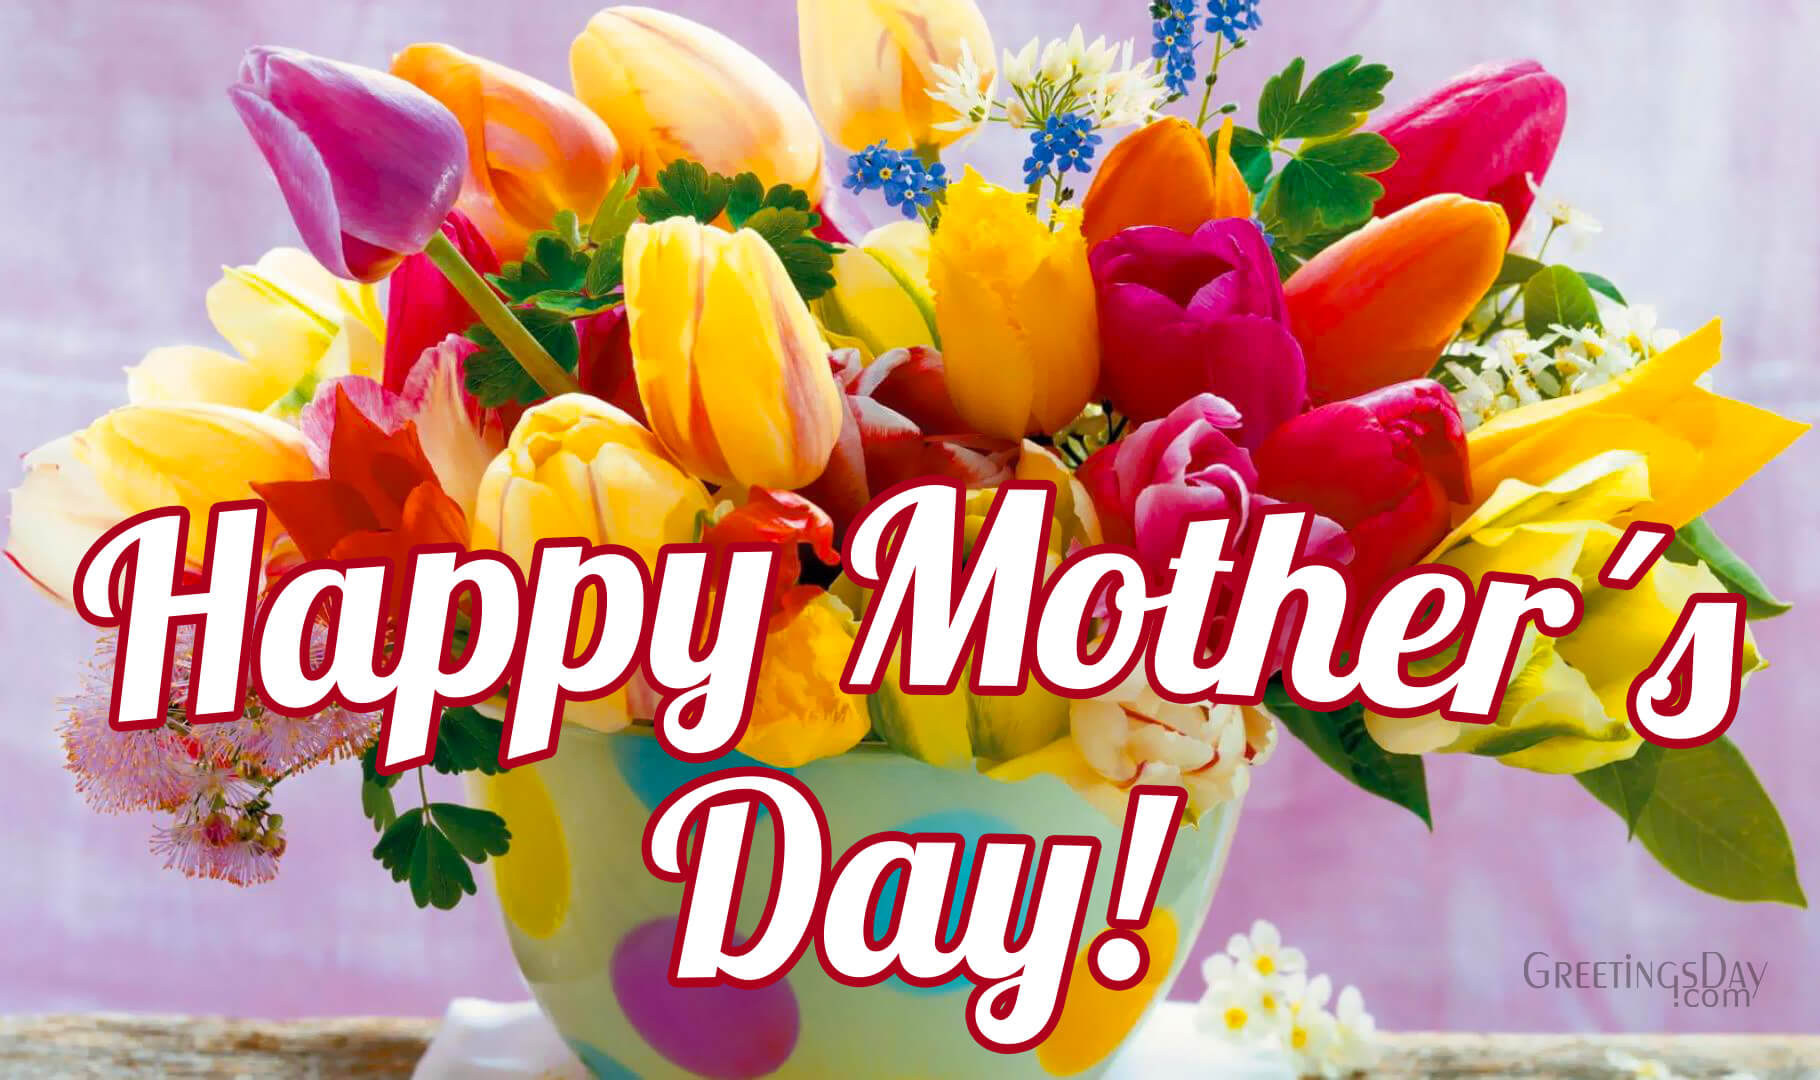 Happy Mother's Day Cards - HD Wallpaper 